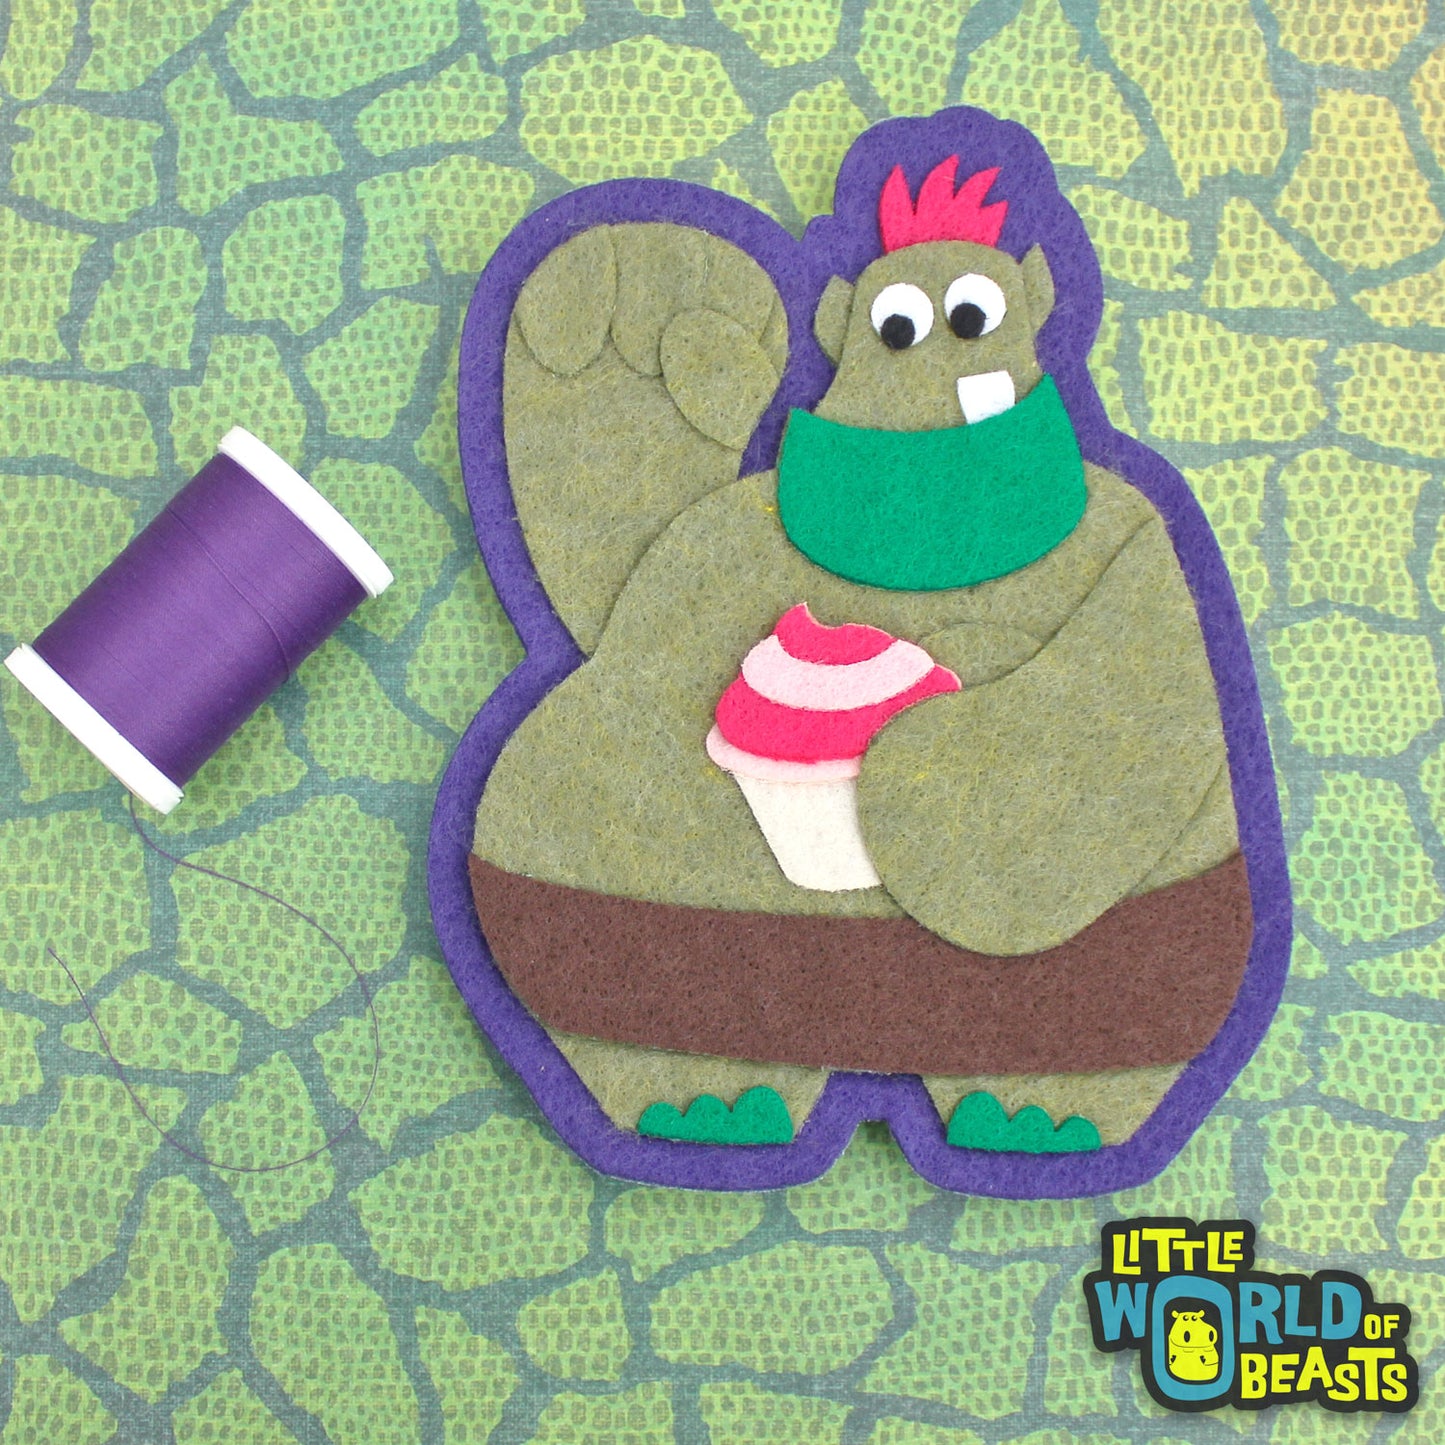 Otis the Cake Troll - Iron on or Sew On Patch - Little World of Beasts